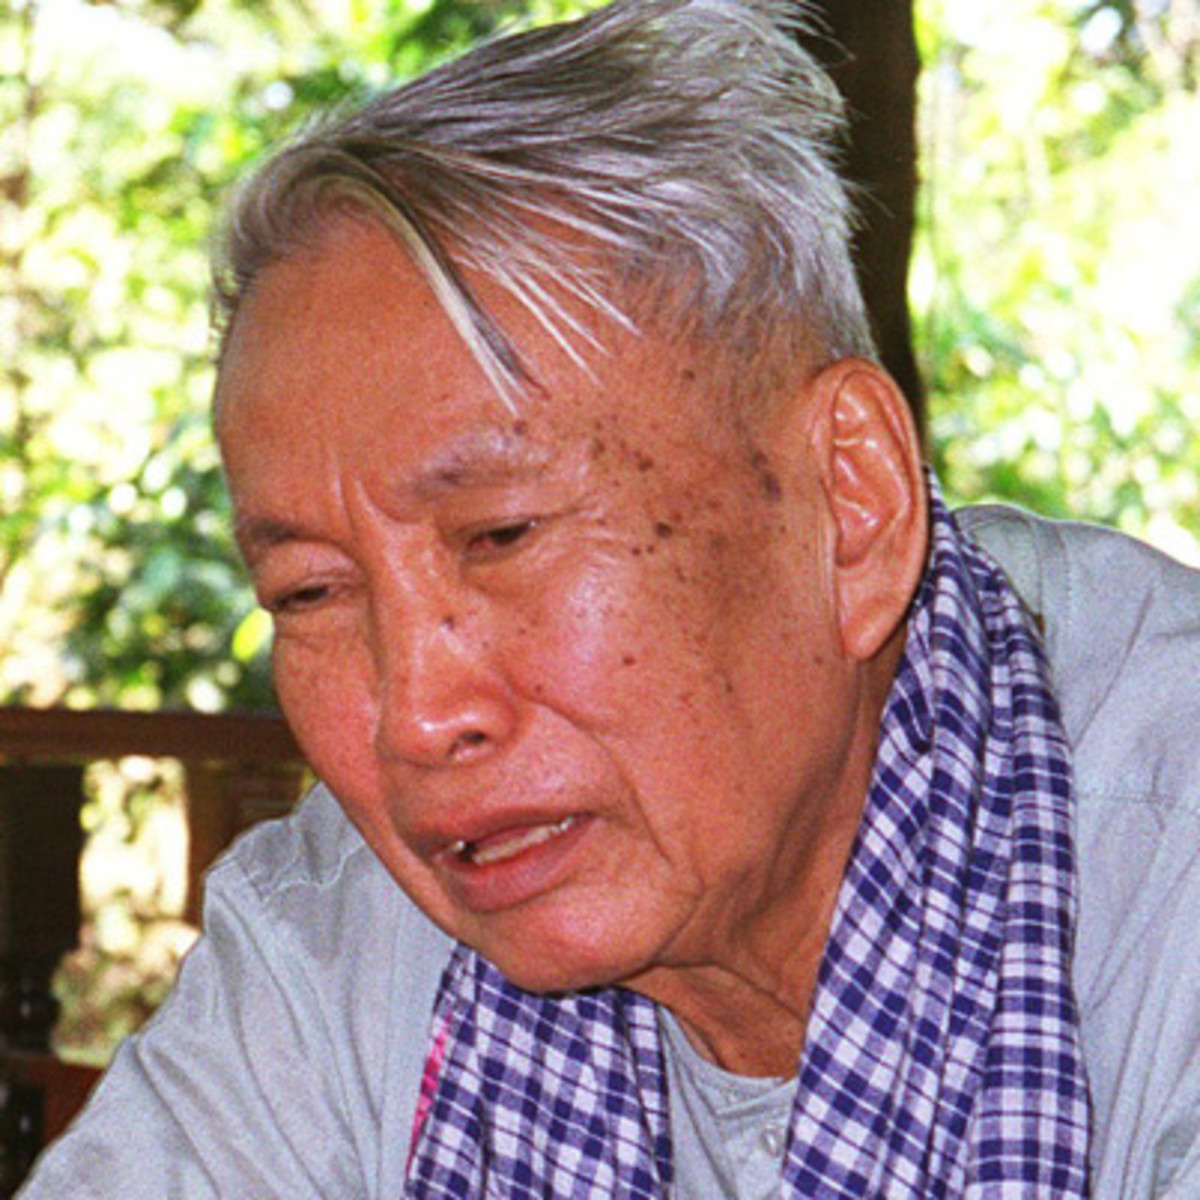 Pol Pot in his later years